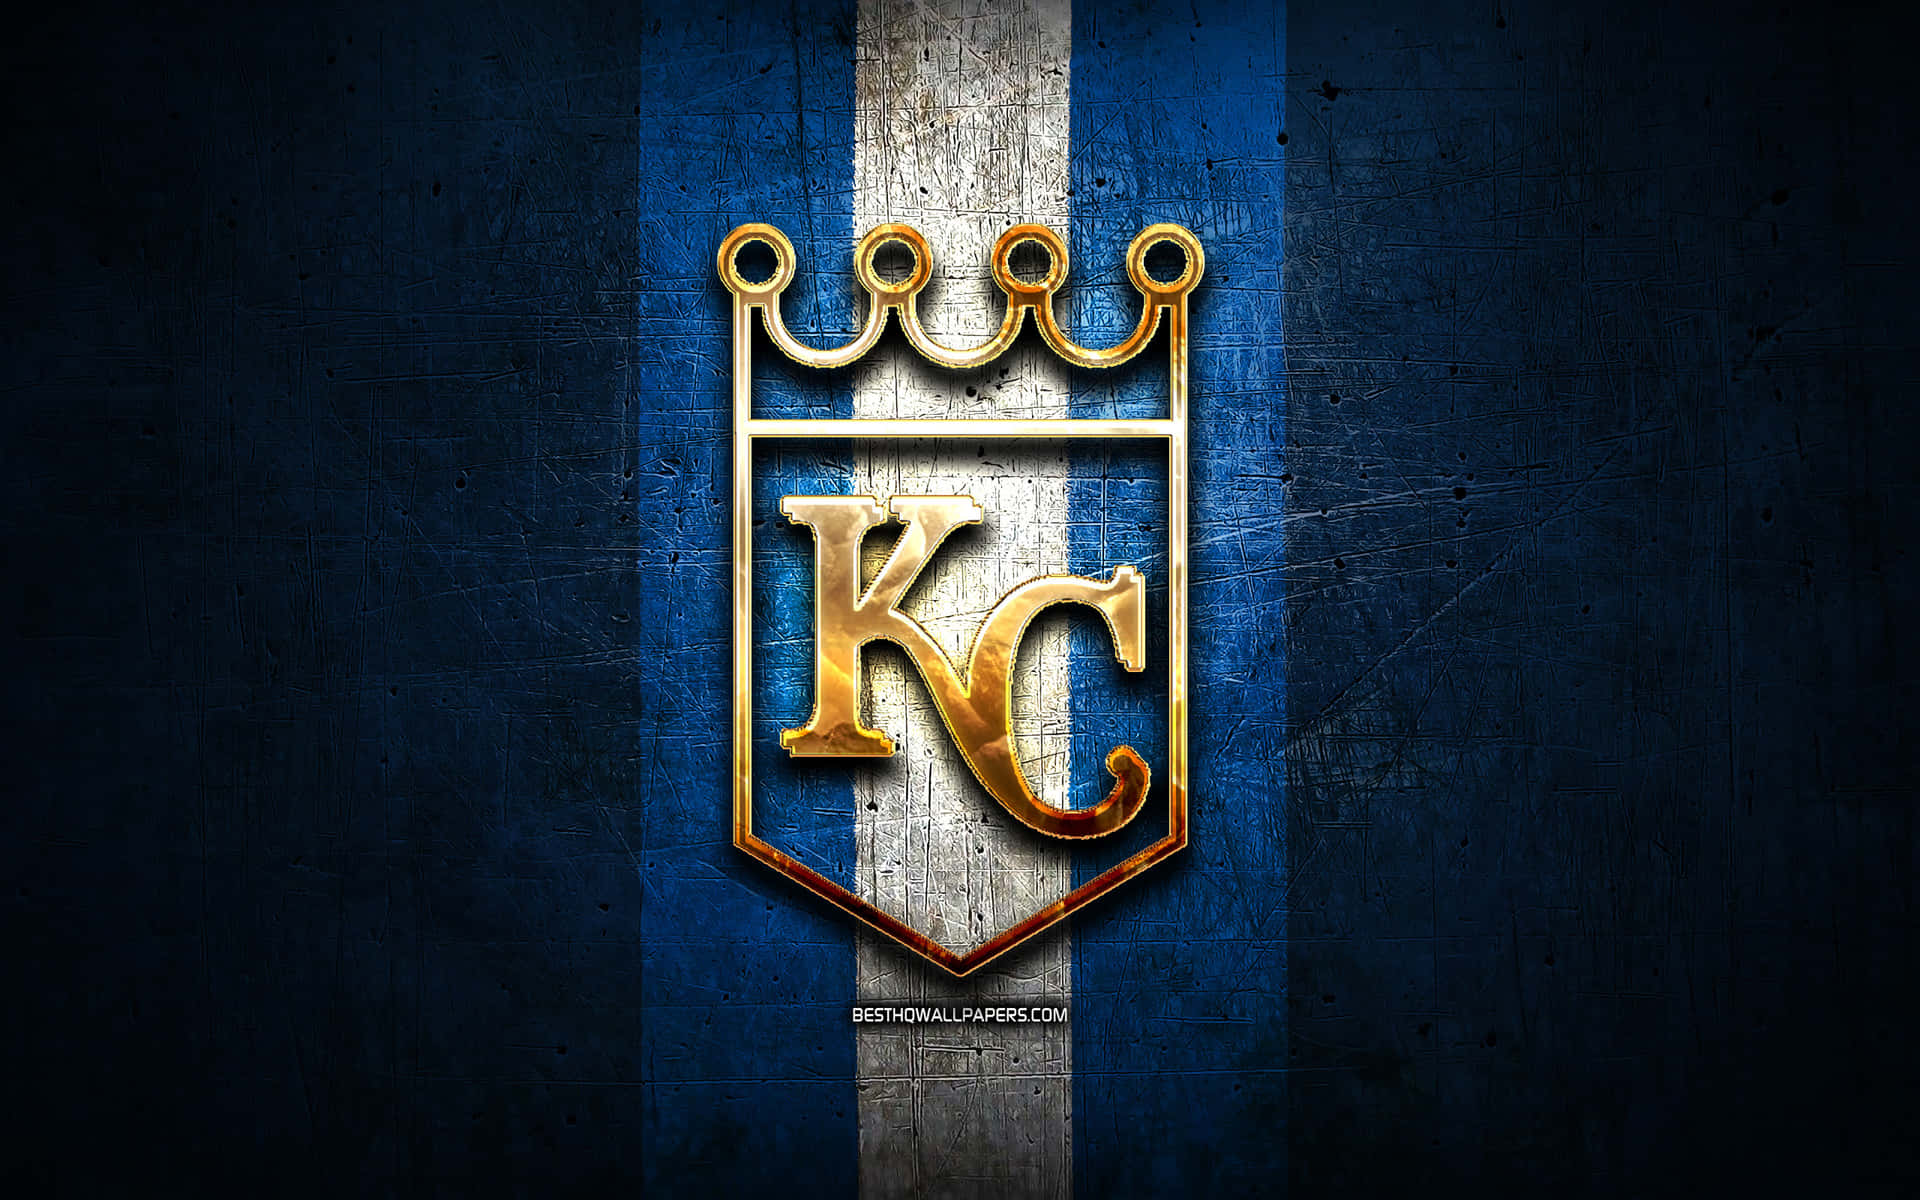 Download Image Kansas City Royals Celebrating On Field After Winning the  2015 World Series Wallpaper